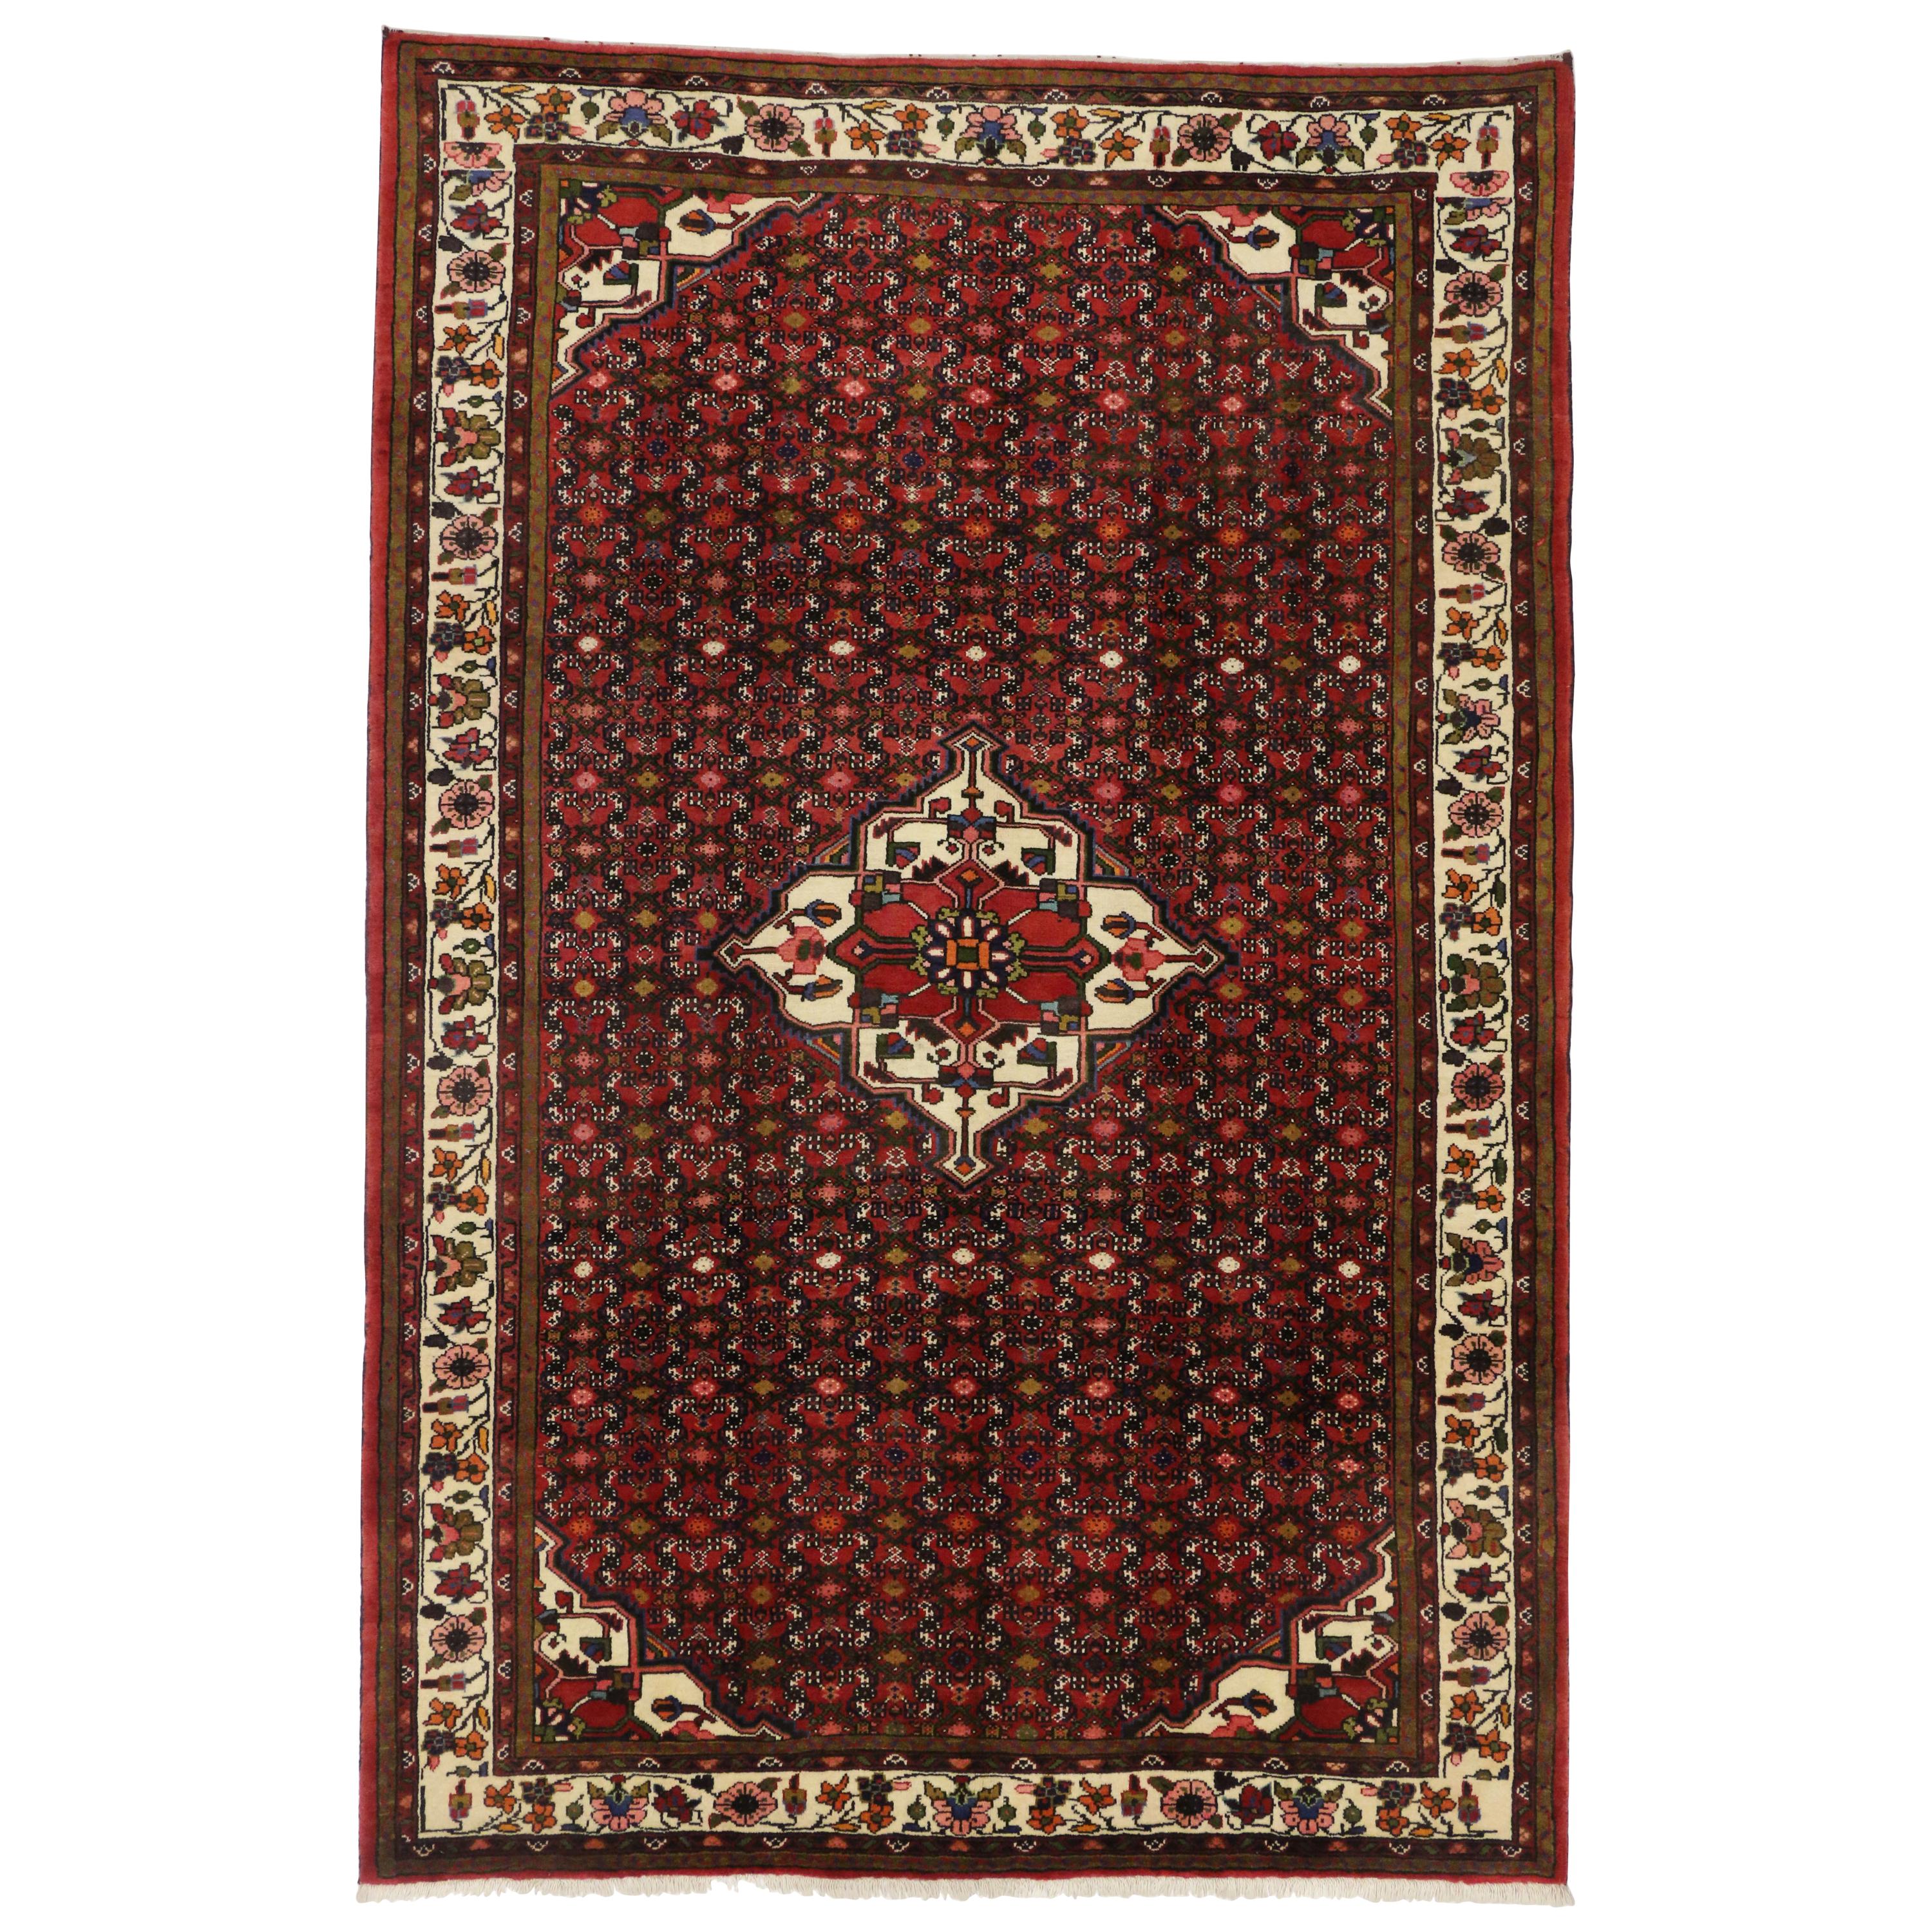 Vintage Persian Hosseinabad Rug with Tudor Manor House Style